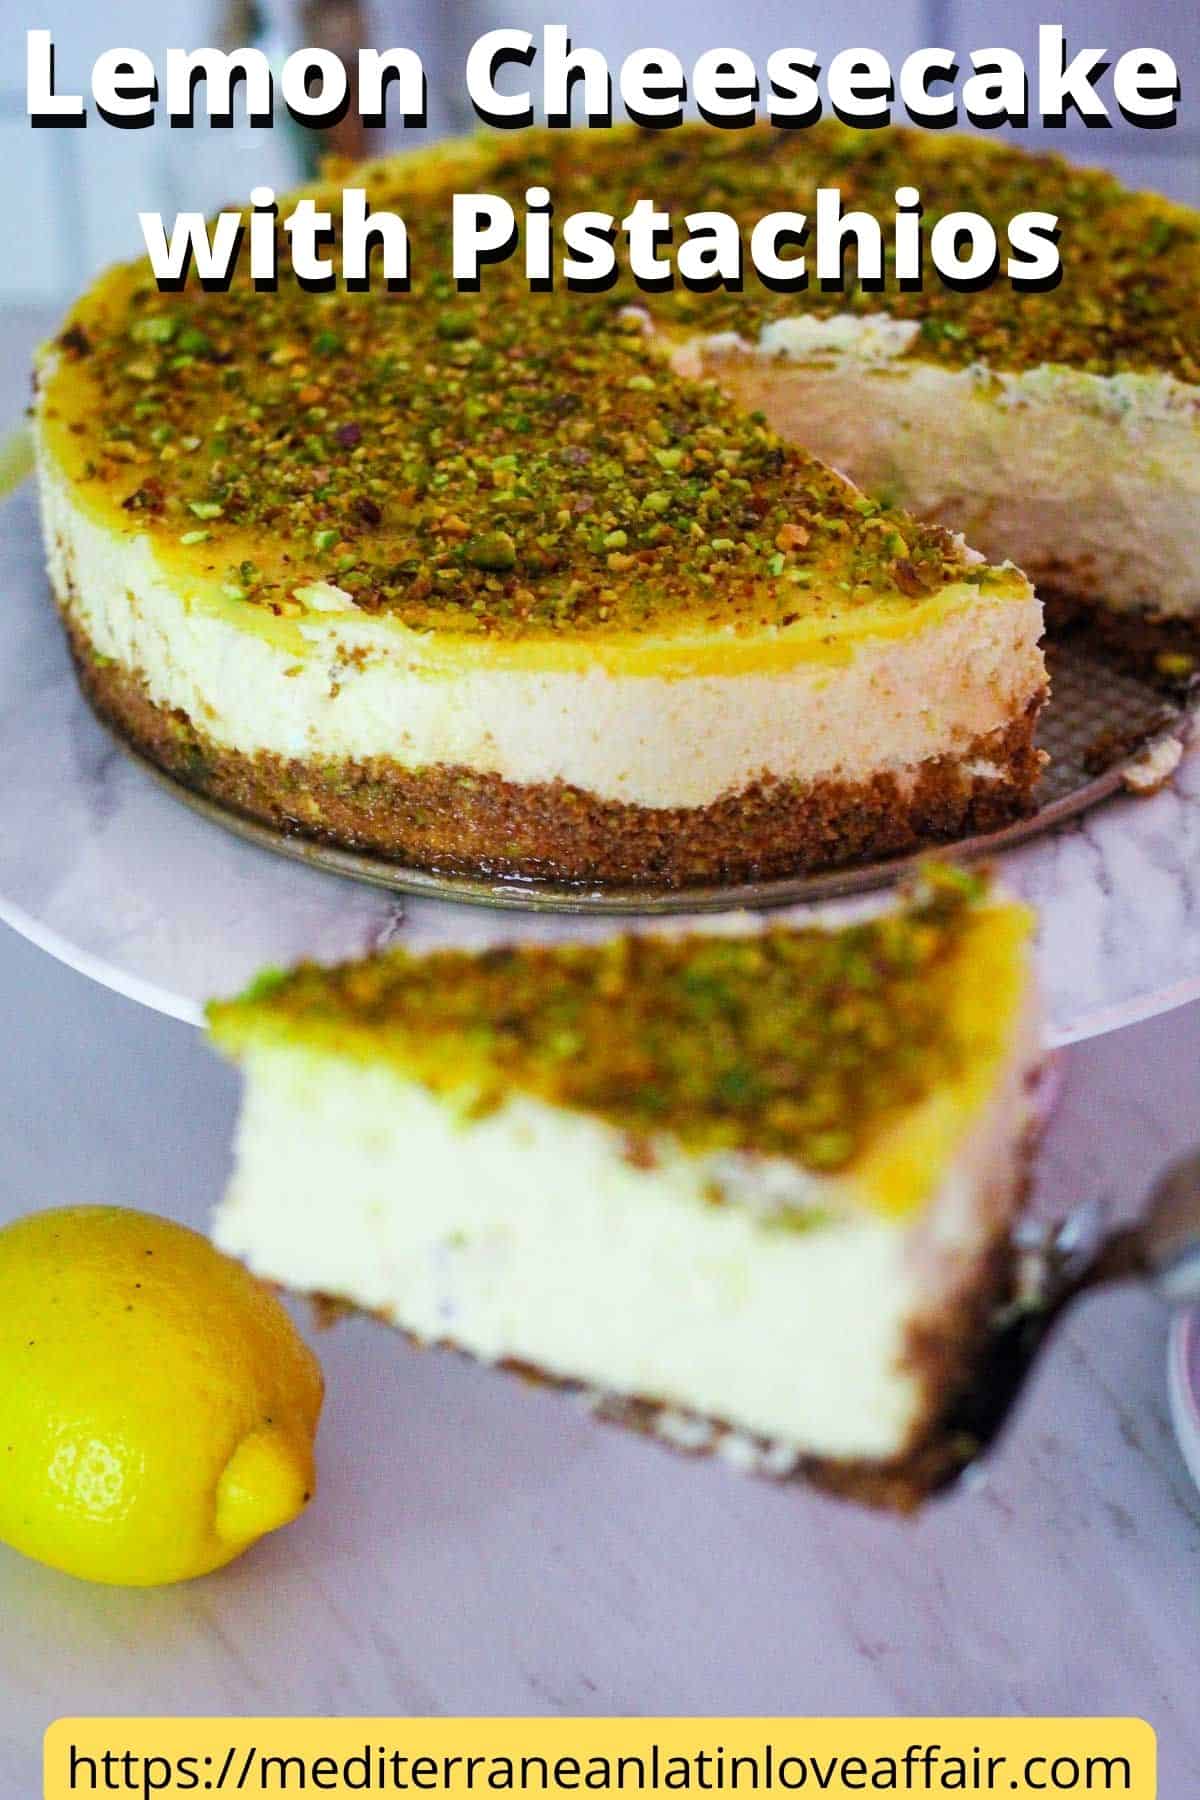 An image prepared for Pinterest, it shows a picture of a cut cheesecake with a slice of the cheesecake being served. It's a lemon cheesecake with lemon curd and pistachios. There's a title bar on top of the picture and a website link at the bottom.